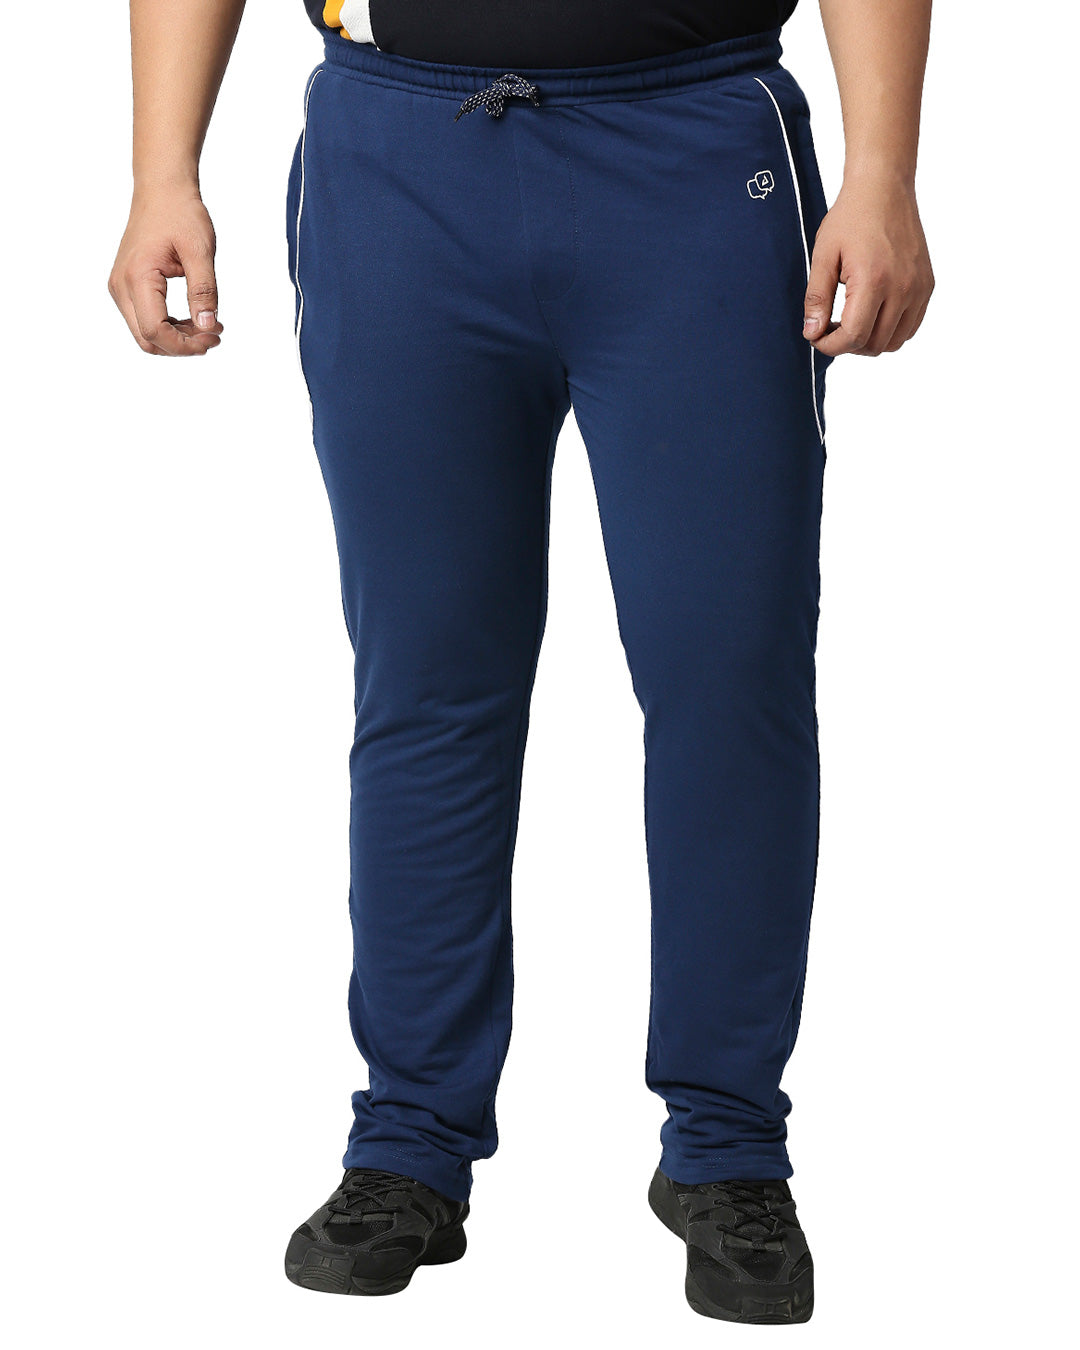 Alstyle Blue Logo Printed Sleek Track Pants for Men – Alstyle India